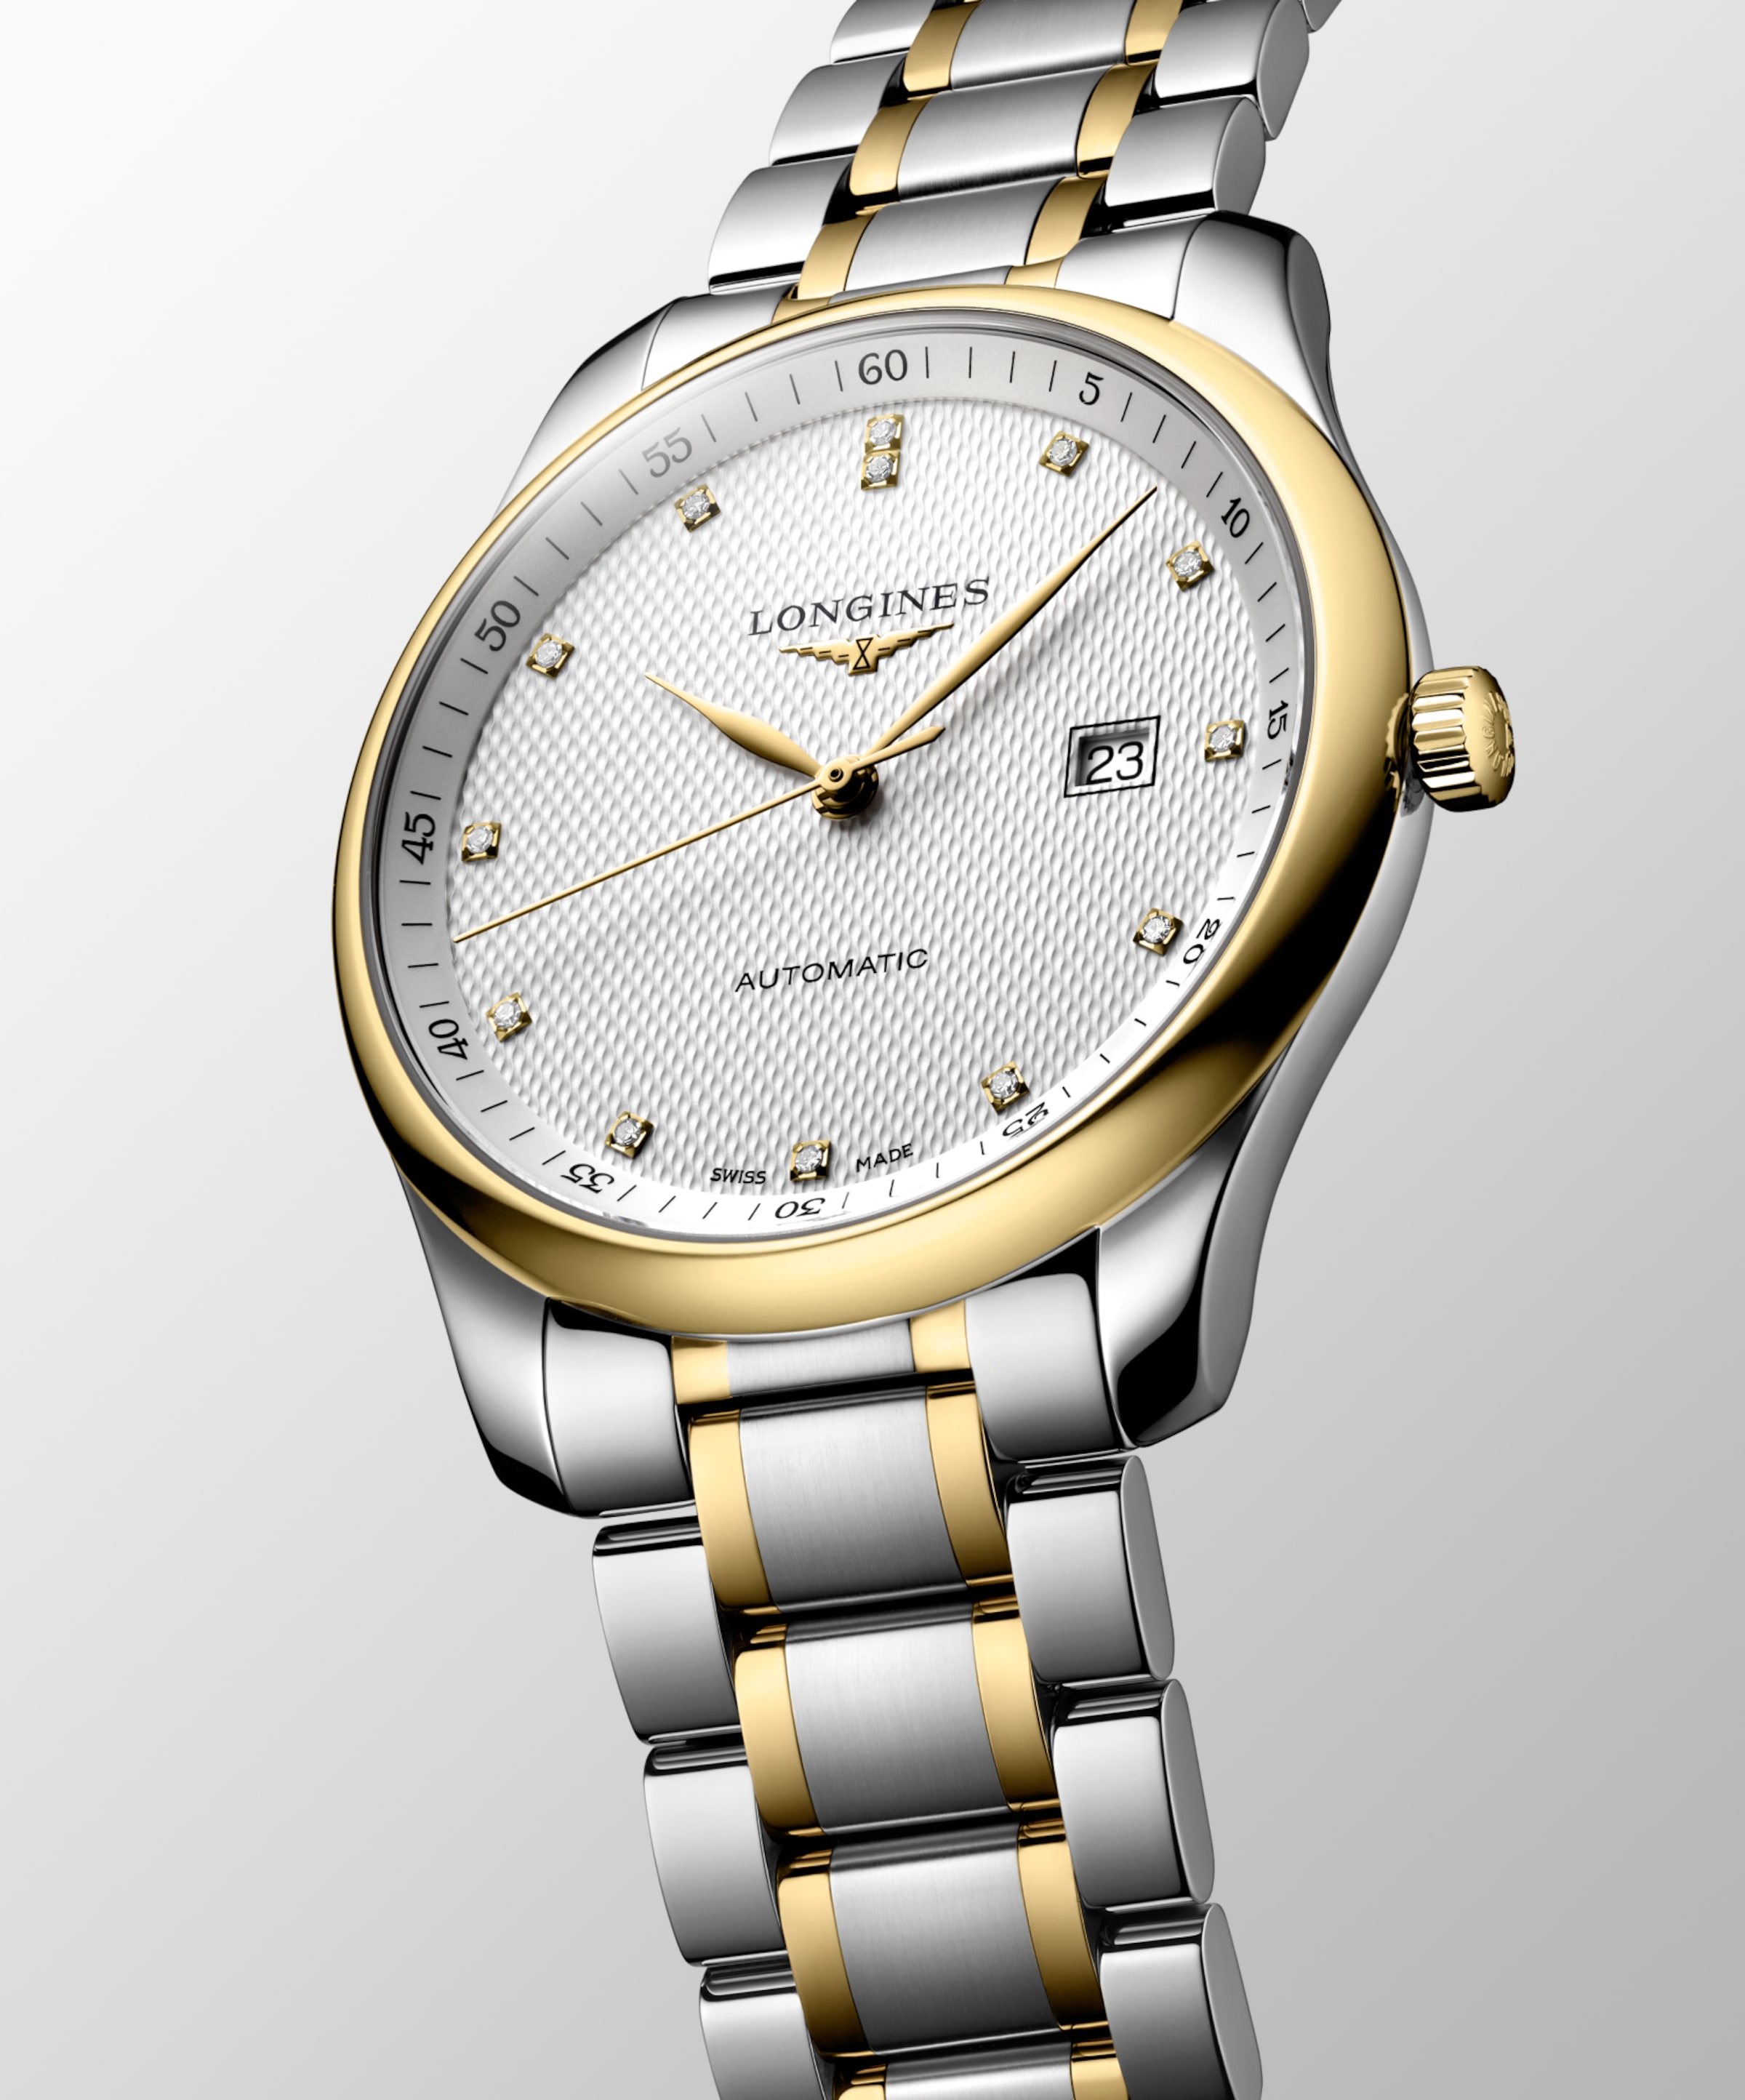 Longines MASTER COLLECTION Automatic Stainless steel and 18 karat yellow gold cap 200 Watch - L2.893.5.97.7